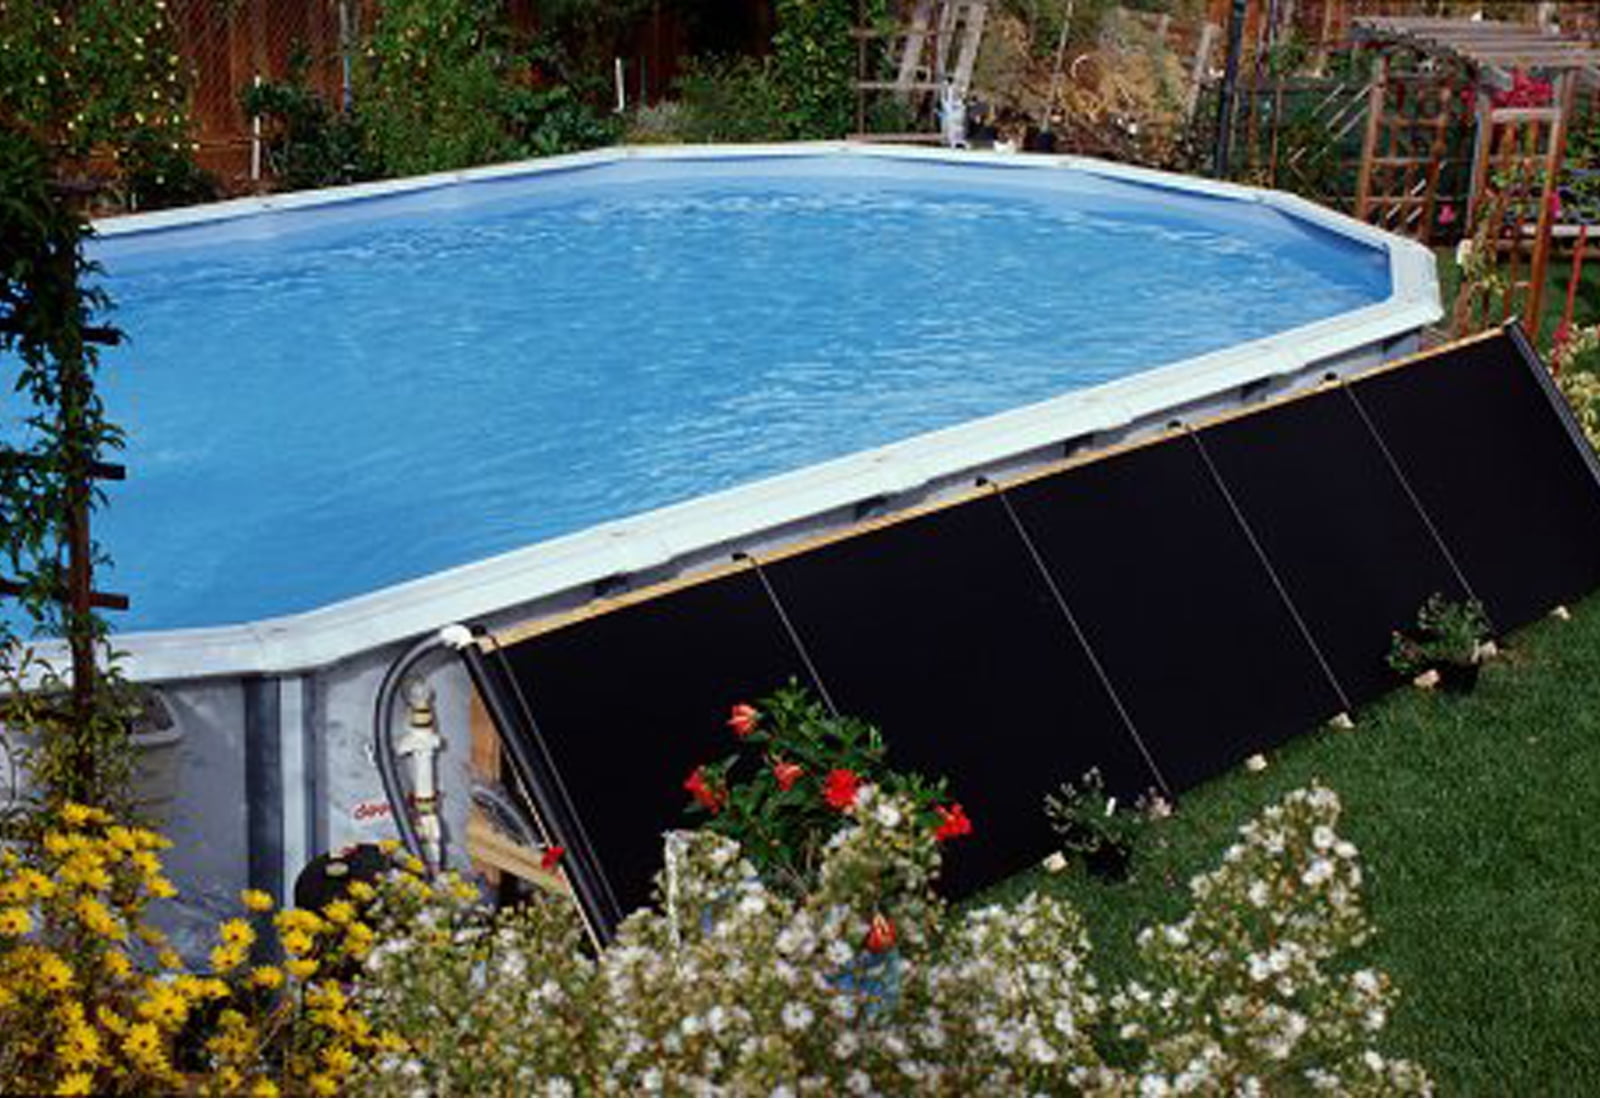  Swimming Pool Solar Heater System In Ground Above Ground for Large Space